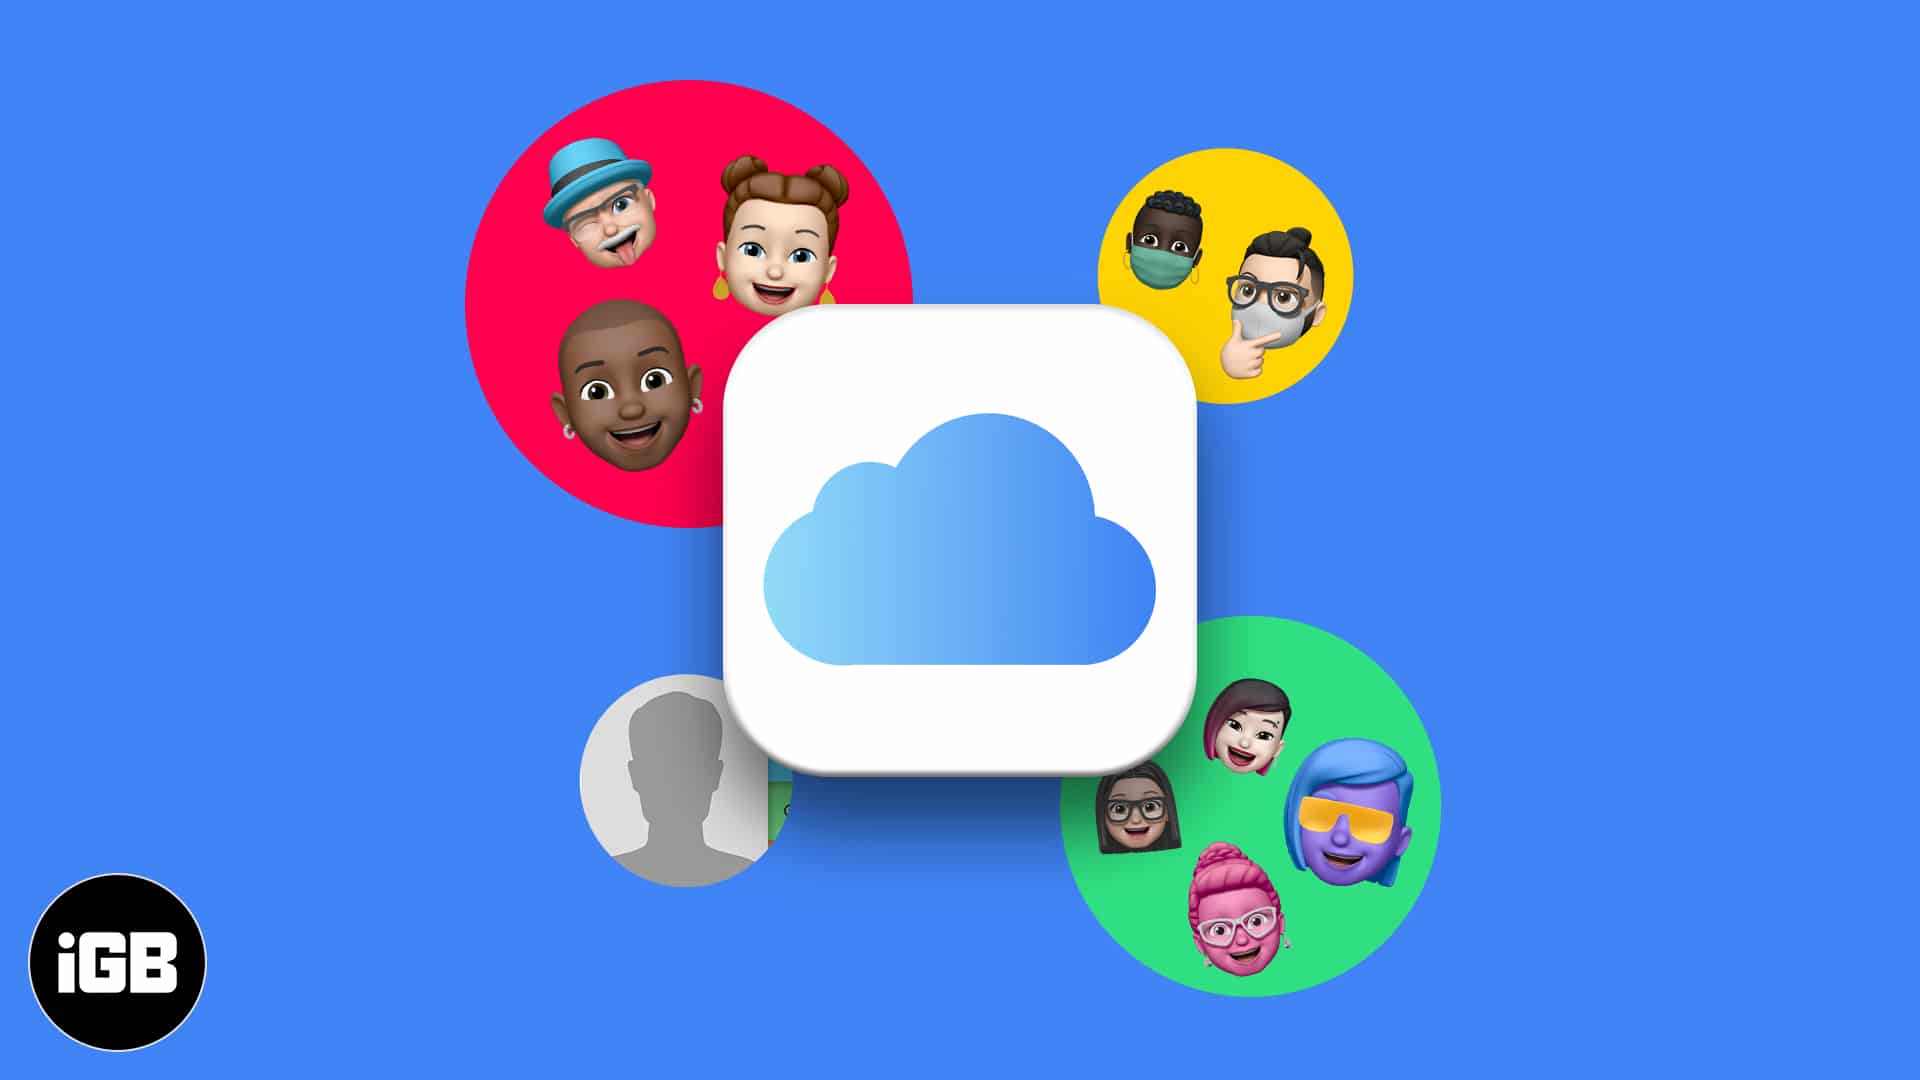 Merge contacts between icloud and other groups